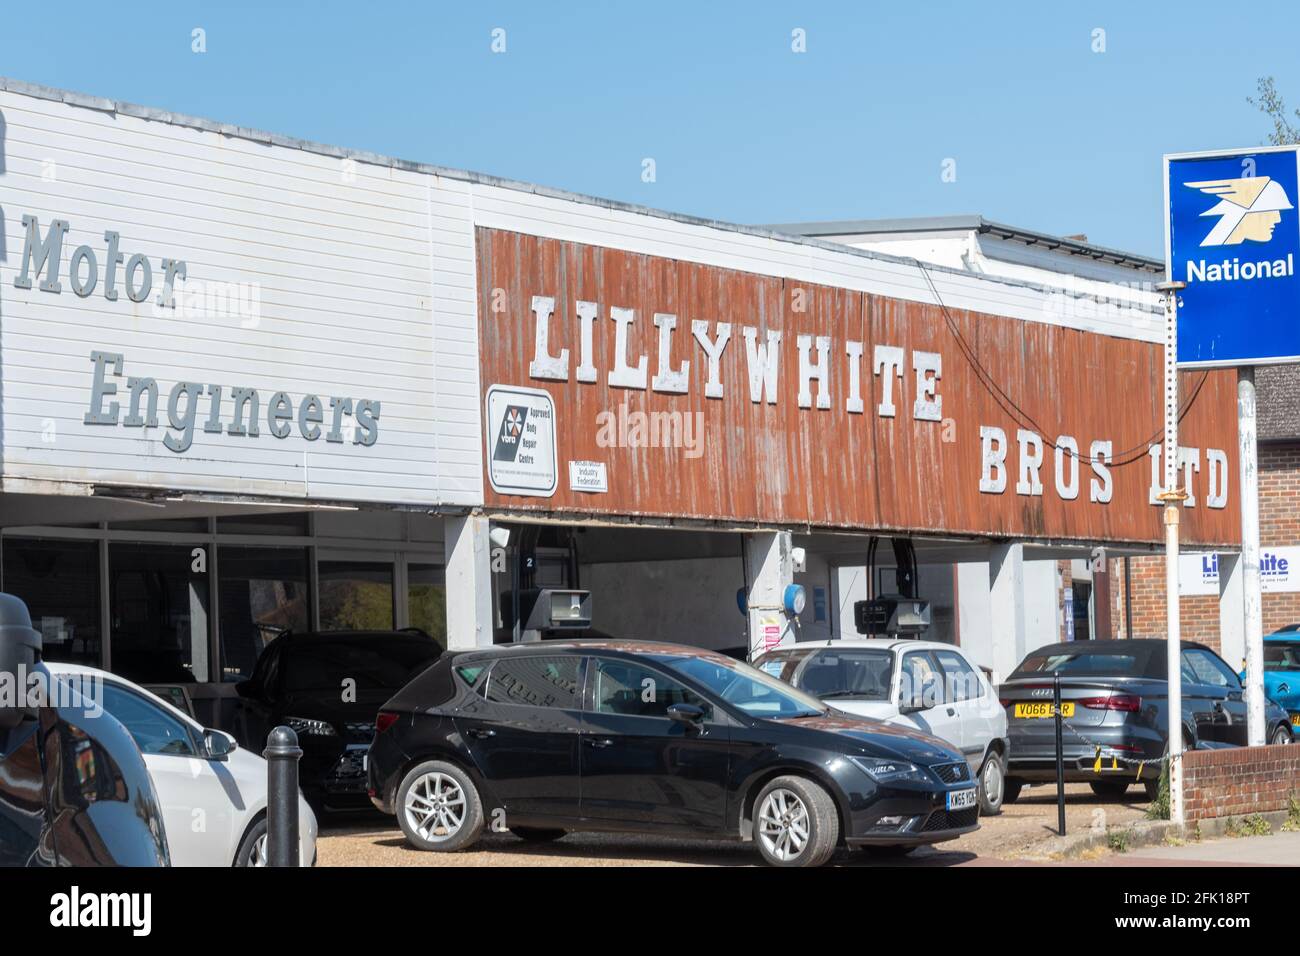 Small family-run business, Lillywhite Bros Ltd Motor Engineers in Emsworth, Hampshire, England, UK Stock Photo